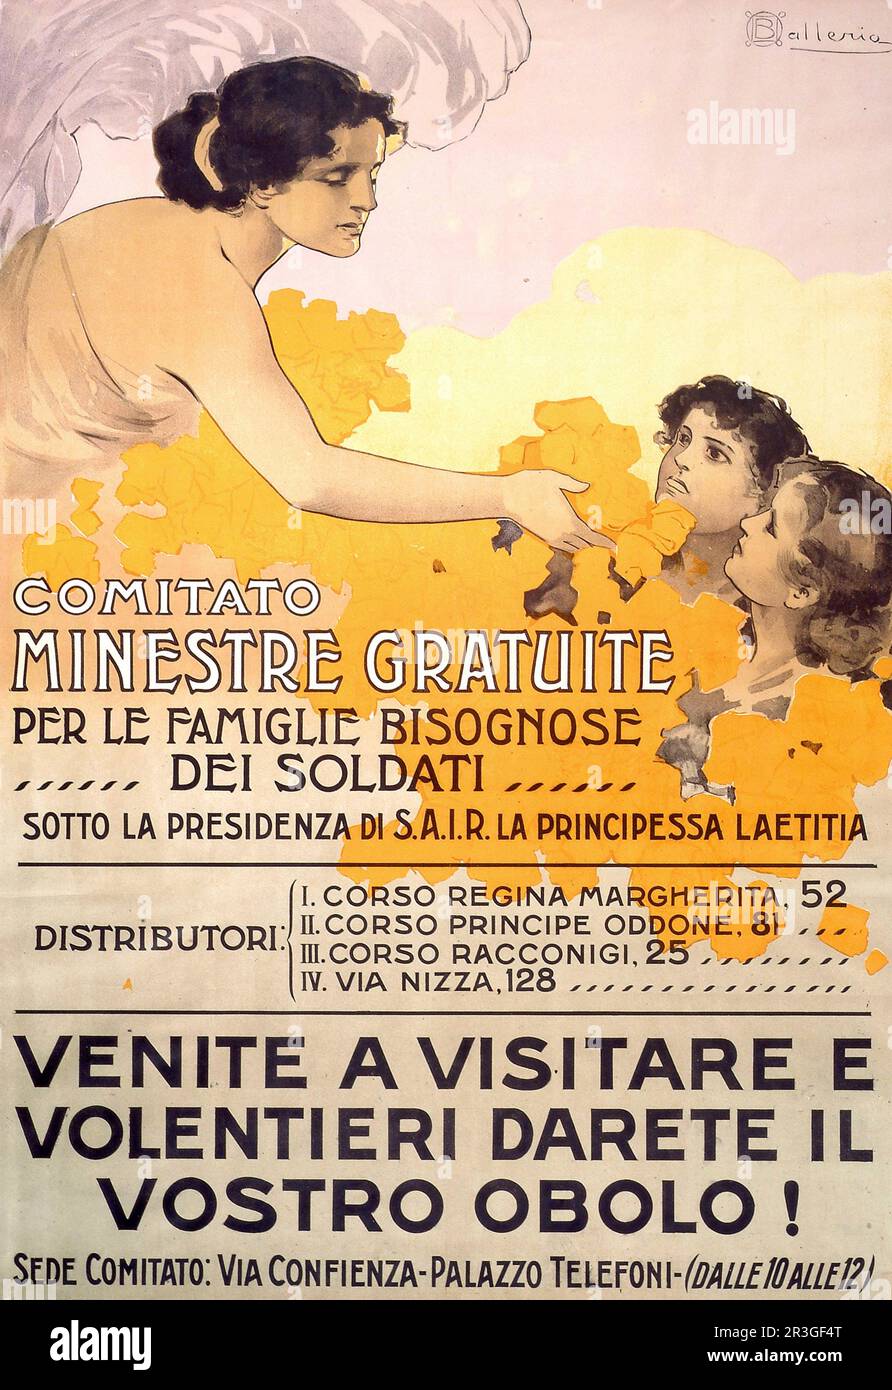 Vintage 1917 Italian poster advertising the work of a committe in Turin to provide free food to the families of soldiers. Stock Photo